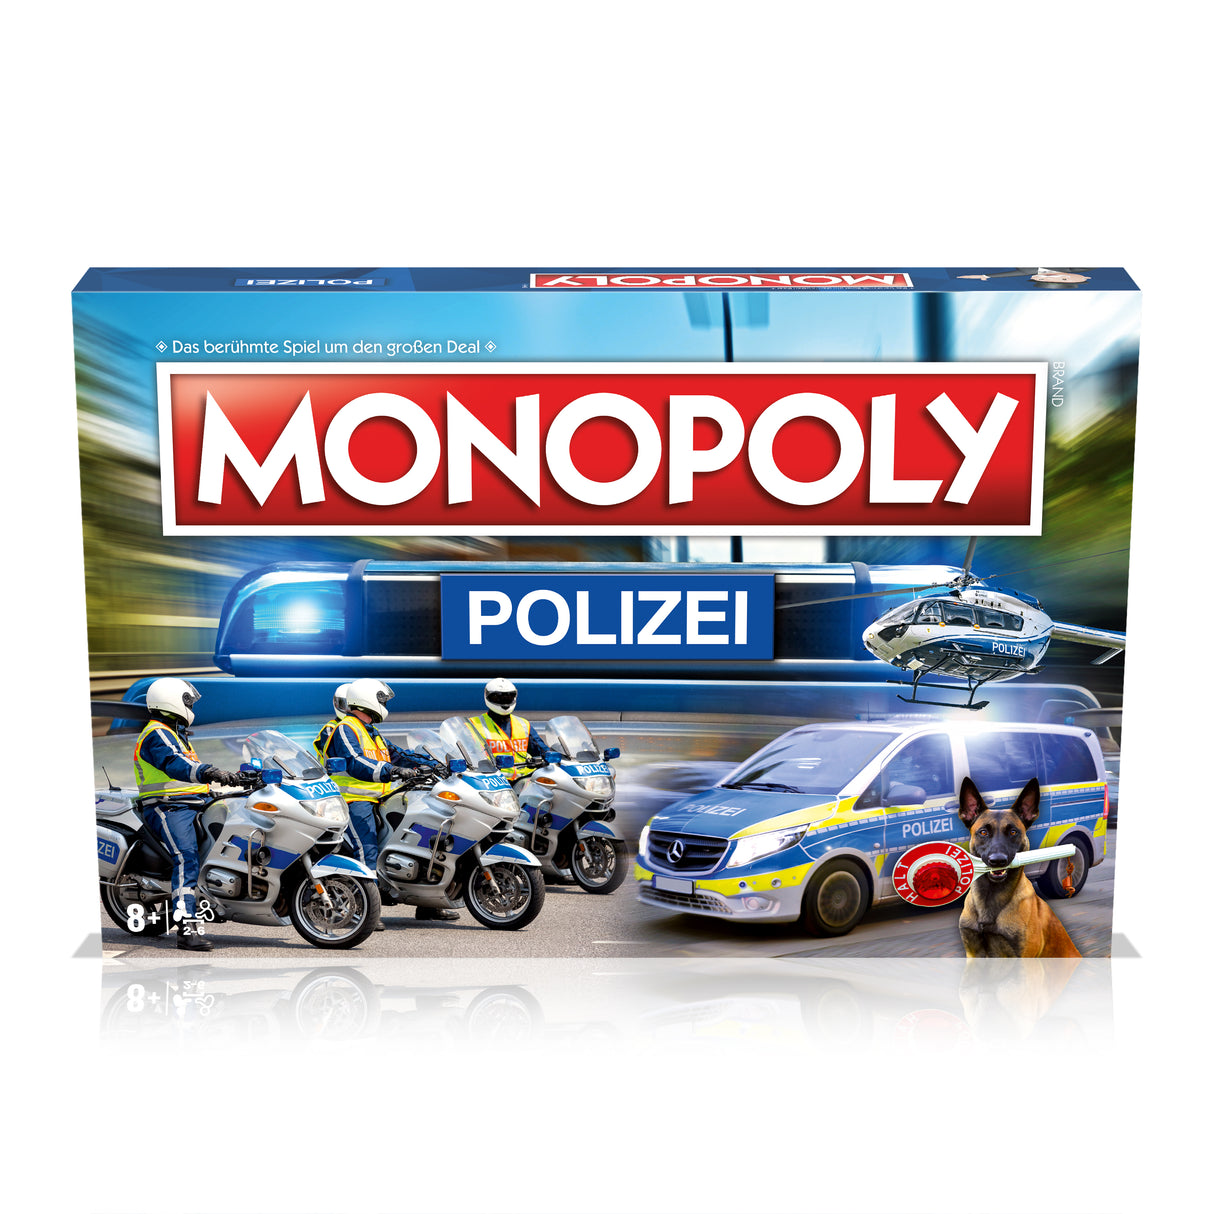 Monopoly police